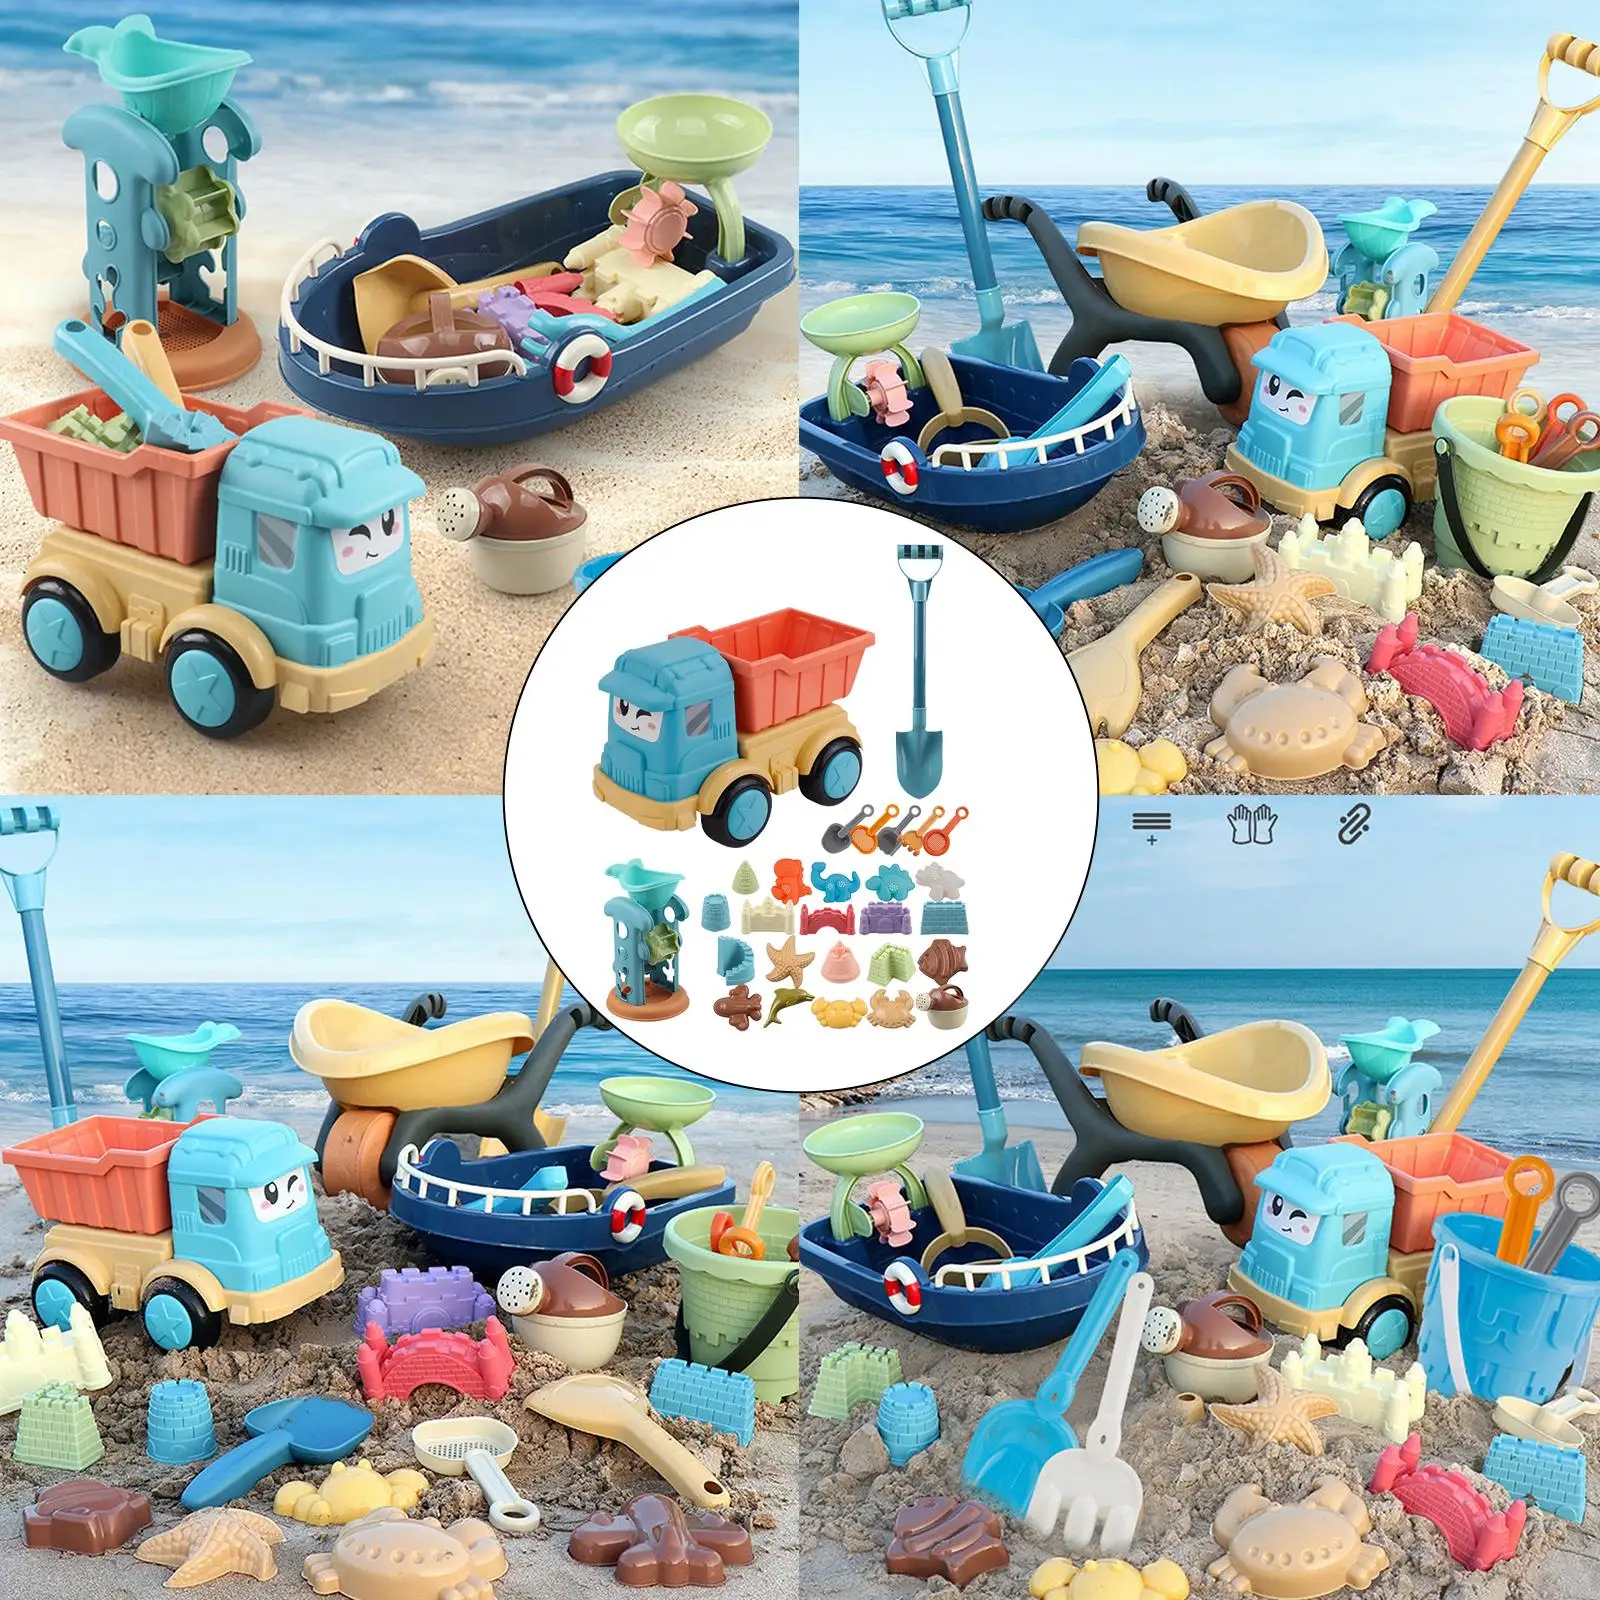 28 Pieces Sand Beach Toys Kids Playset for Games Age 2-6 Birthday Gifts